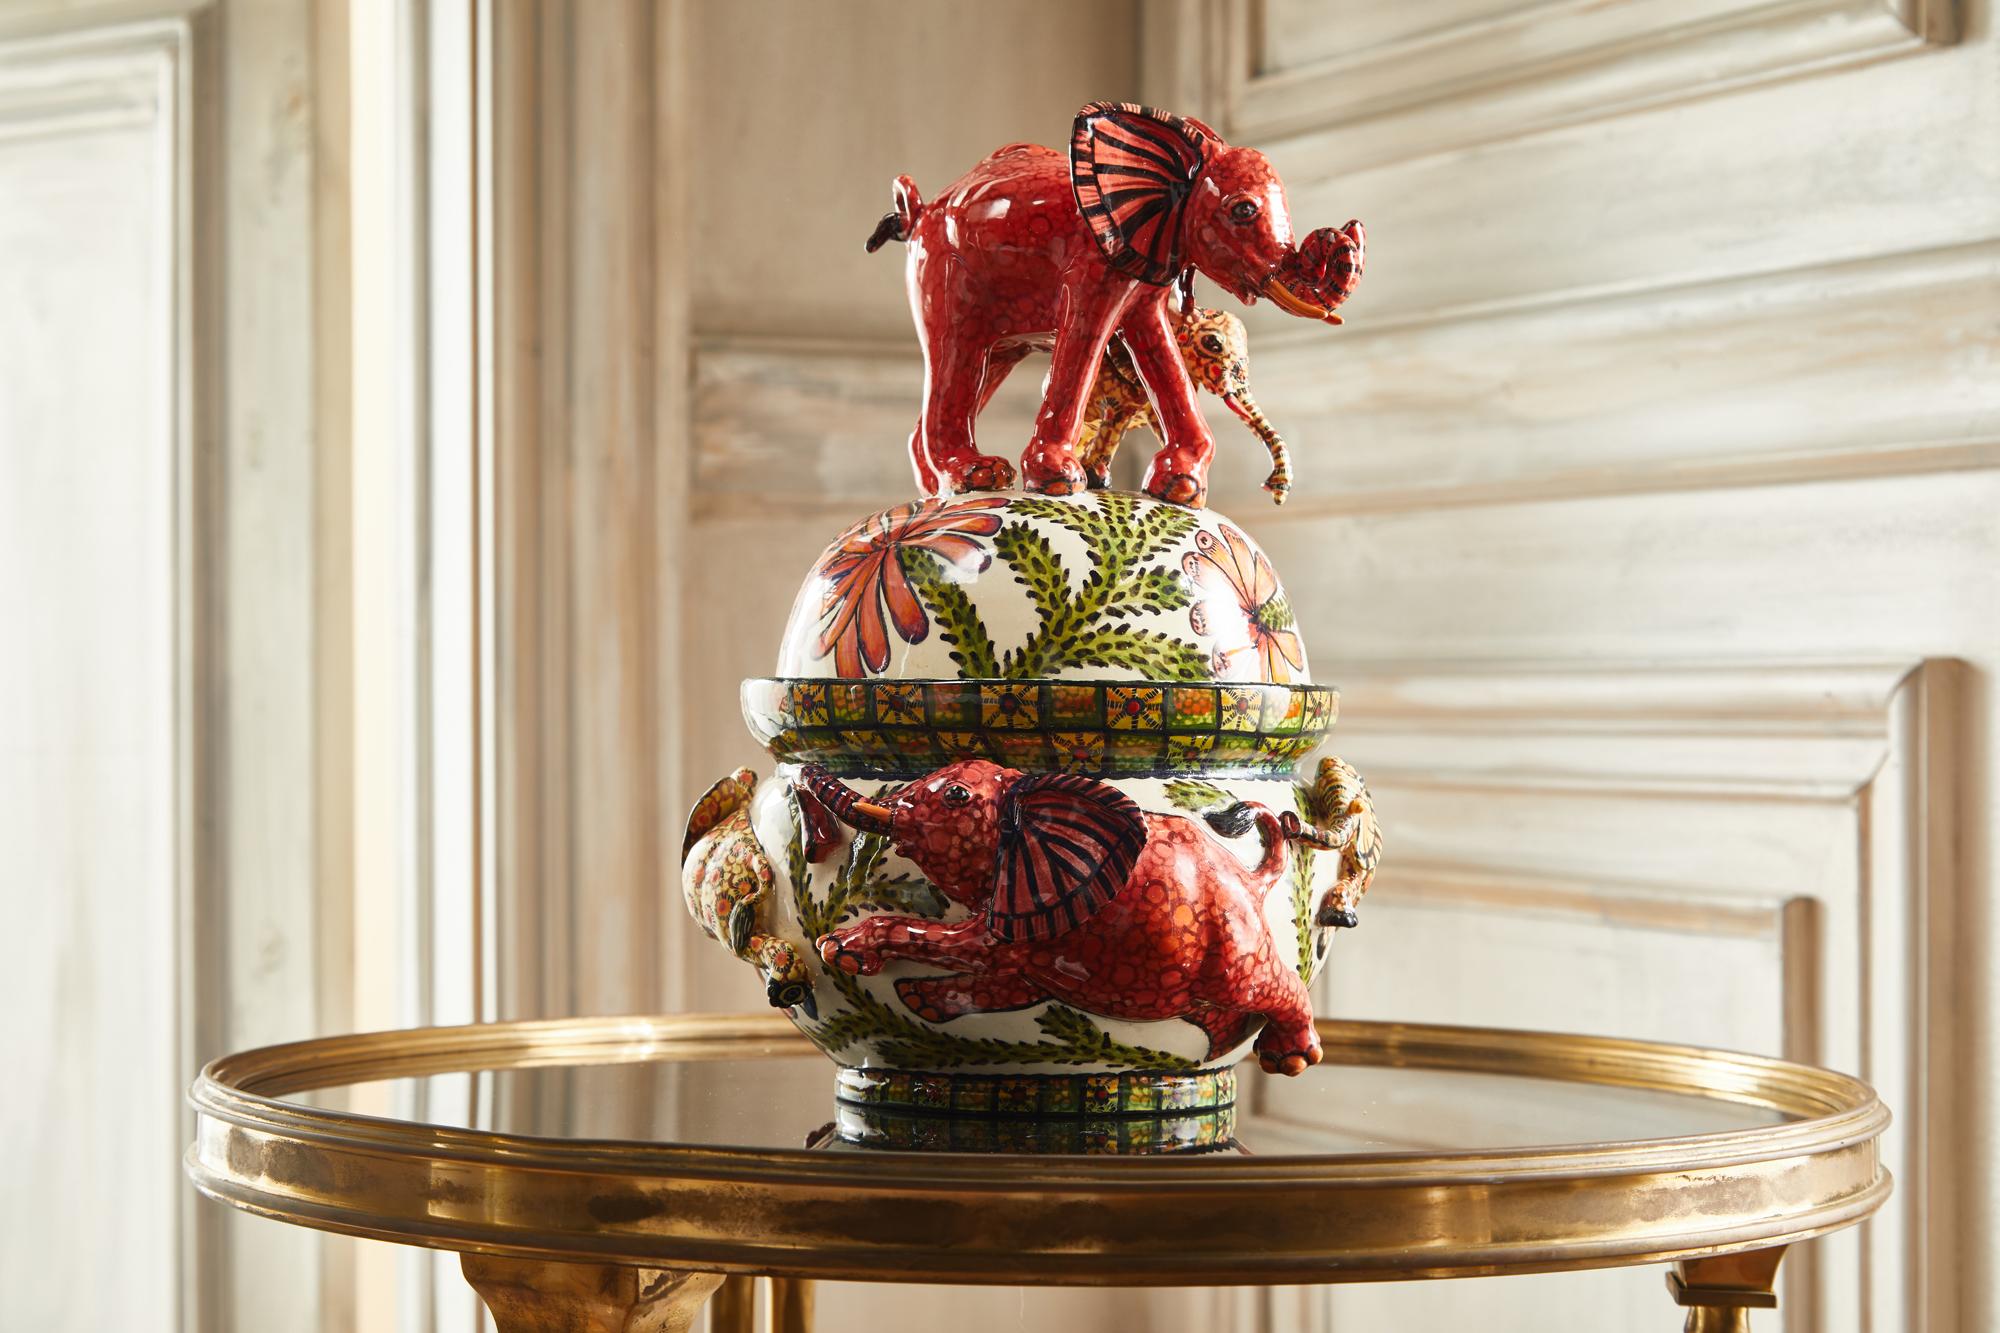 Fall madly in love with our Elephant Tureen, featuring a fantastic sculpture of red and yellow elephants. Its sumptuous exotic flora and refined details make it an exceptional piece worth grand interior design projects.

The mystical world of